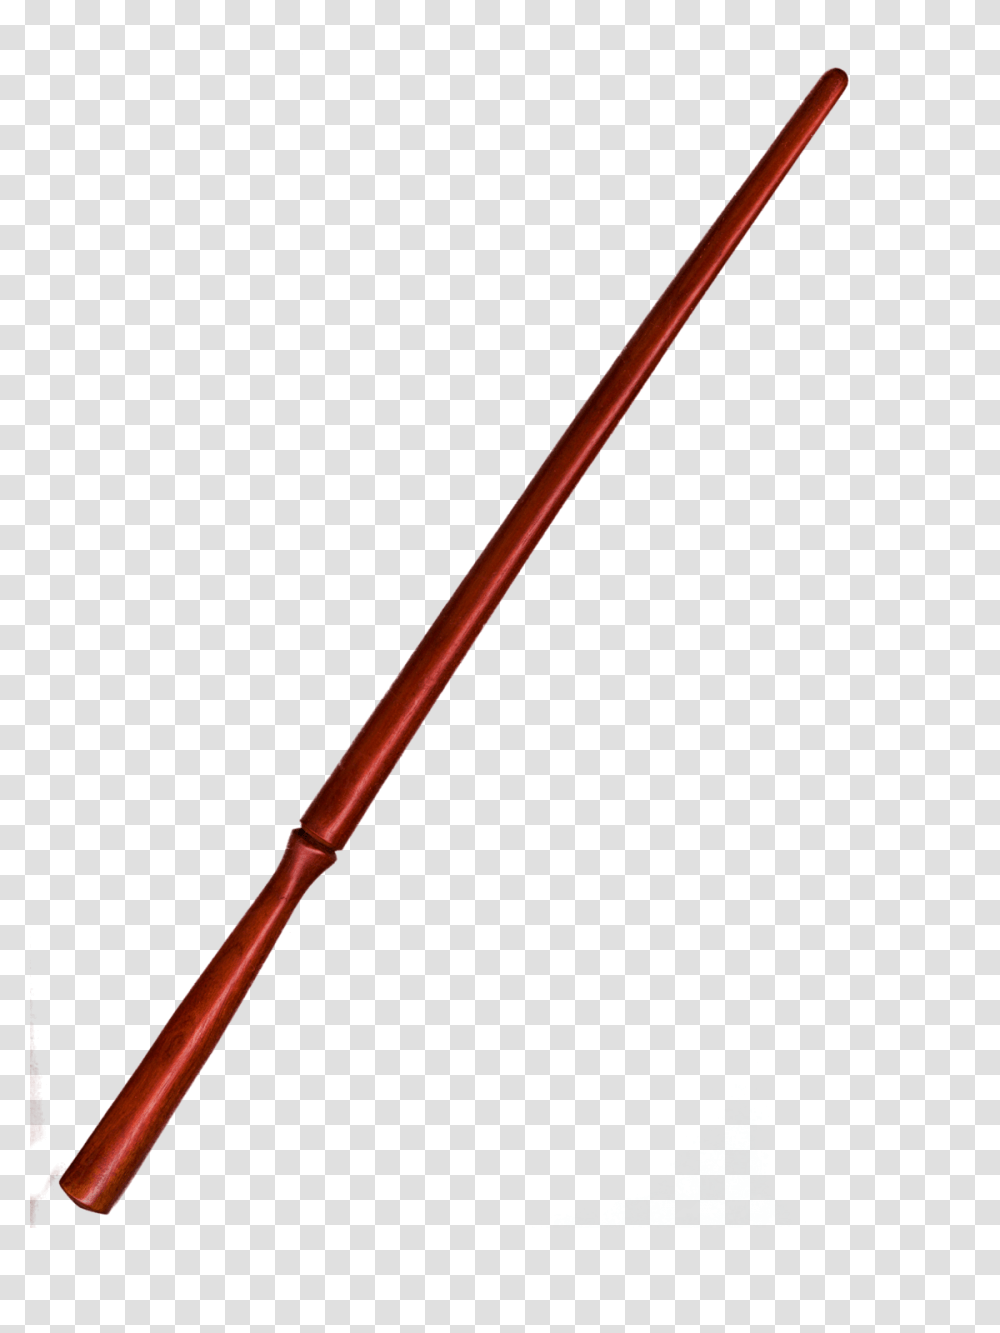 Wand Download Image, Handrail, Banister, Oars, Arrow Transparent Png